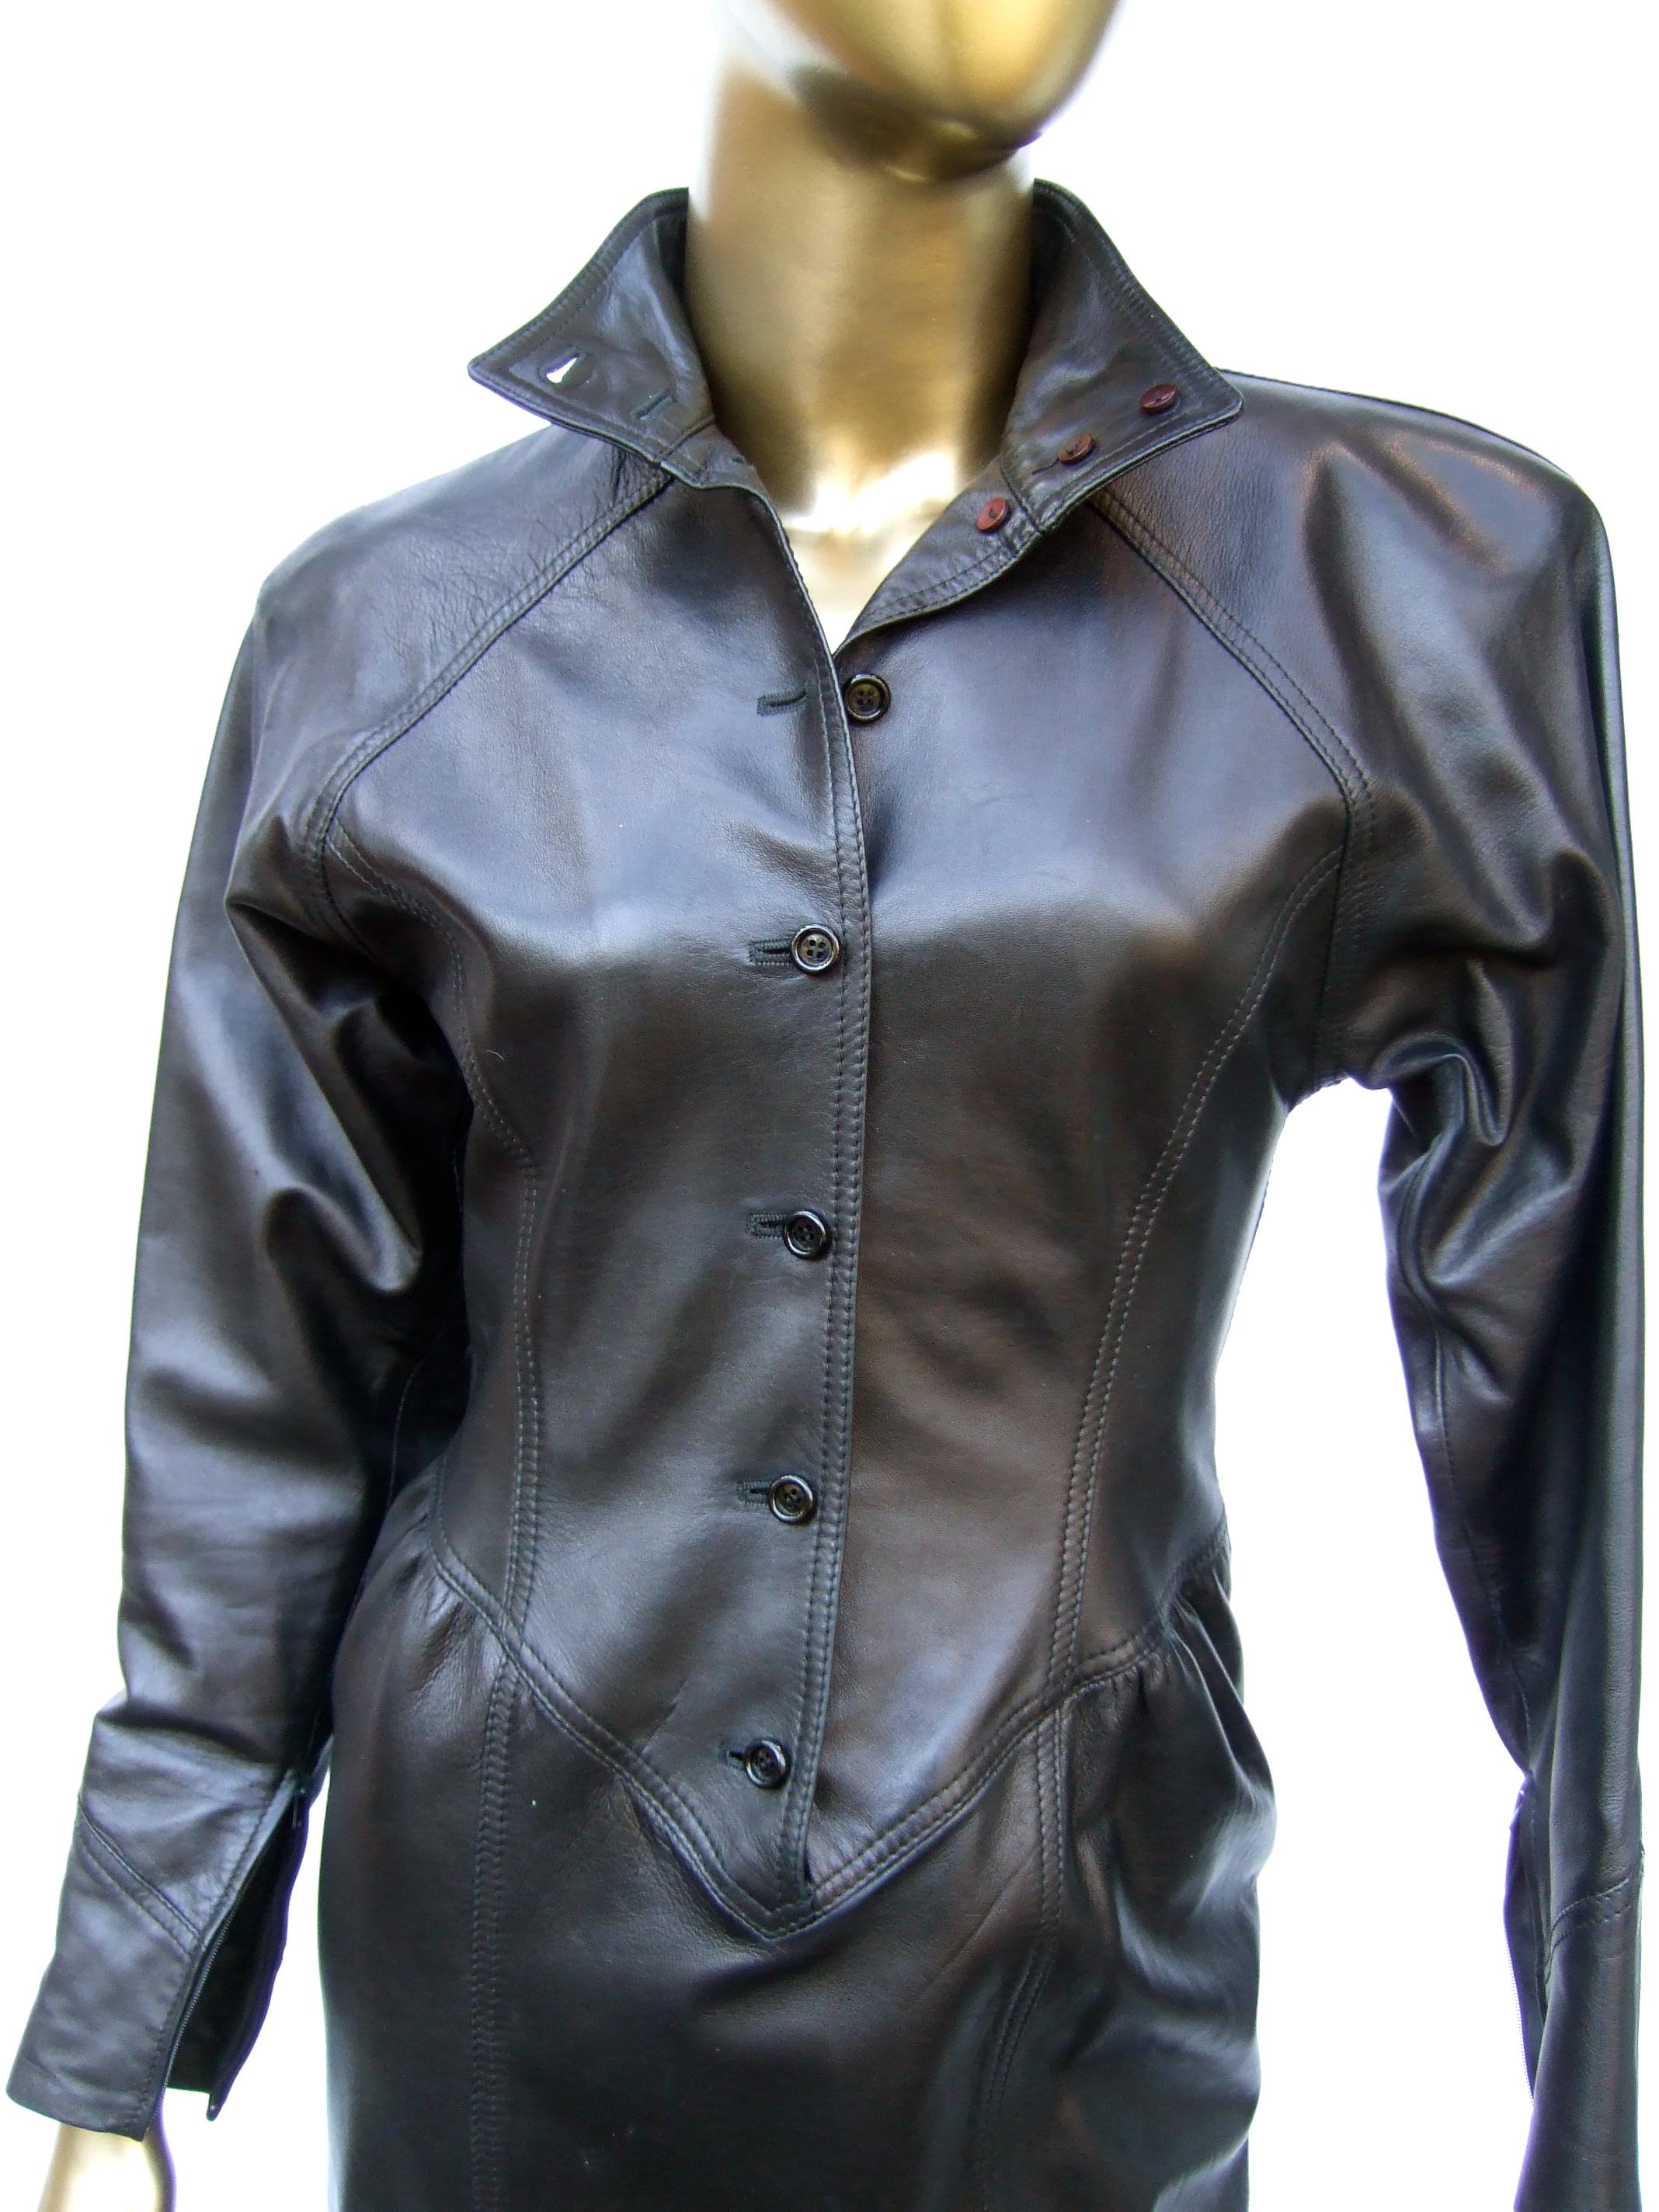 Women's Emanuel Ungaro Paris Avant-garde Edgy Brown Leather Dress Made in Italy c 1980s For Sale